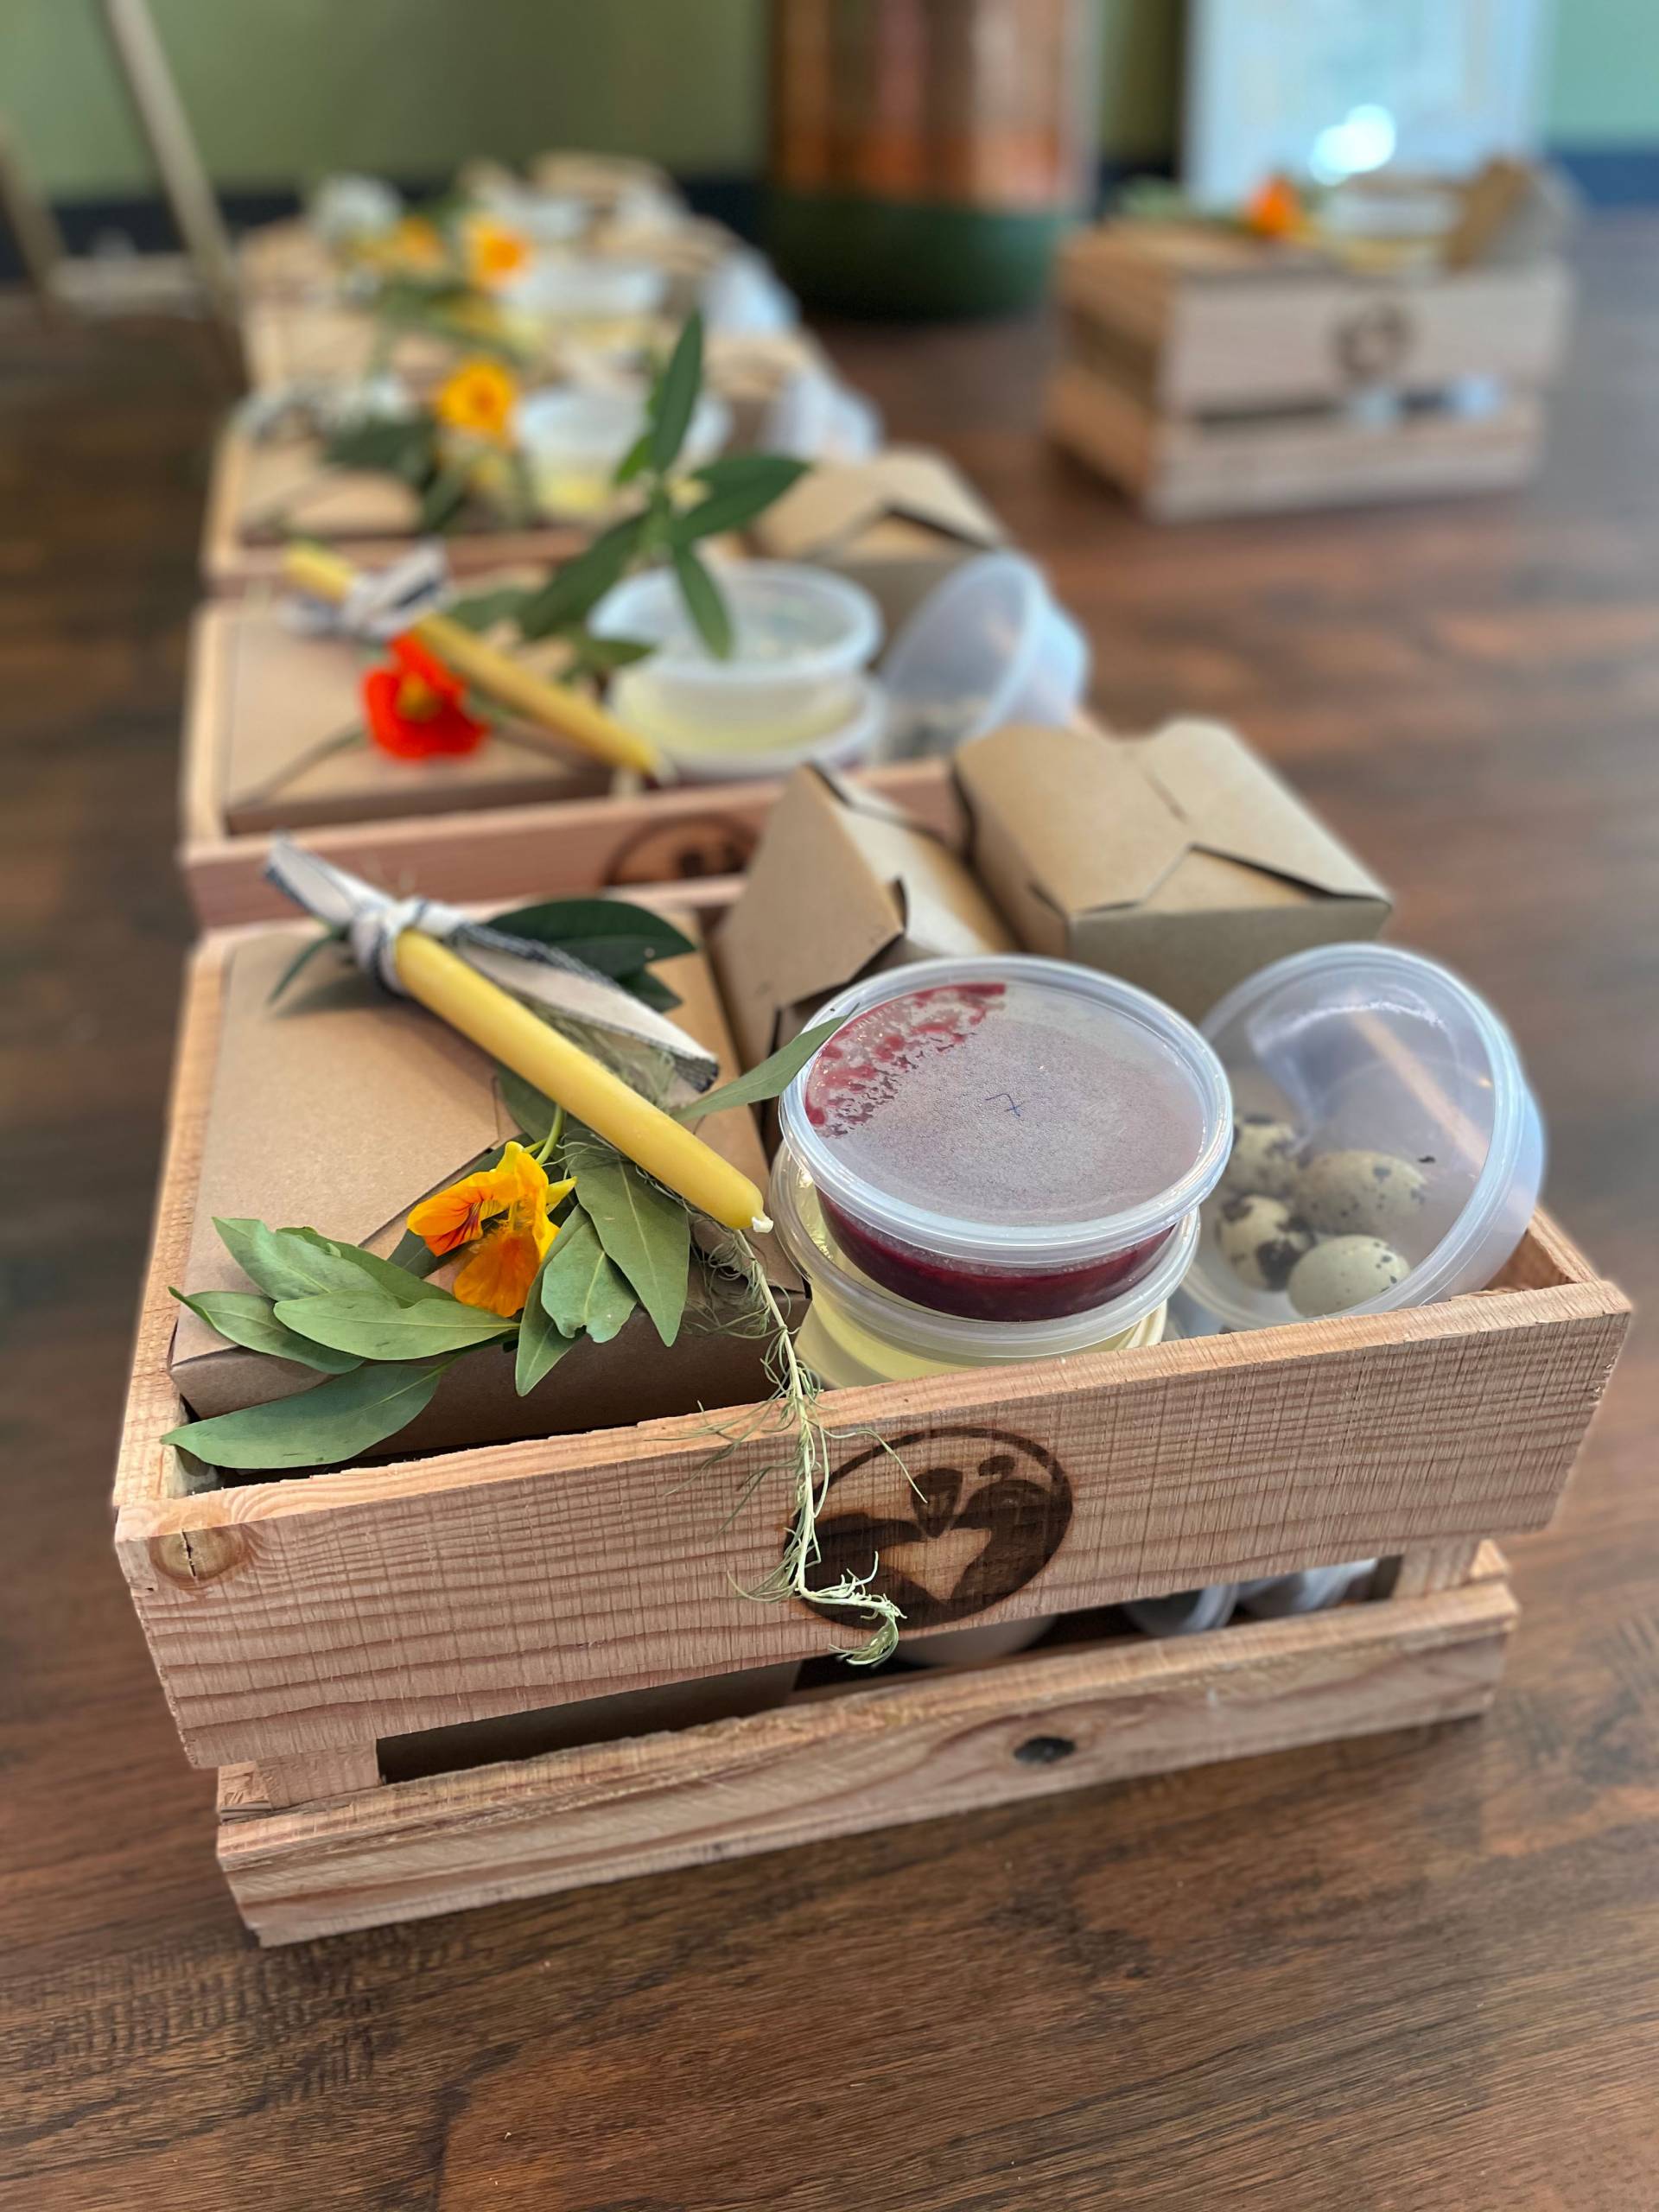 One of Cafe Ohlone's meal kits, packaged in a handmade wooden box, with fresh flowers and tubs of ingredients visible.